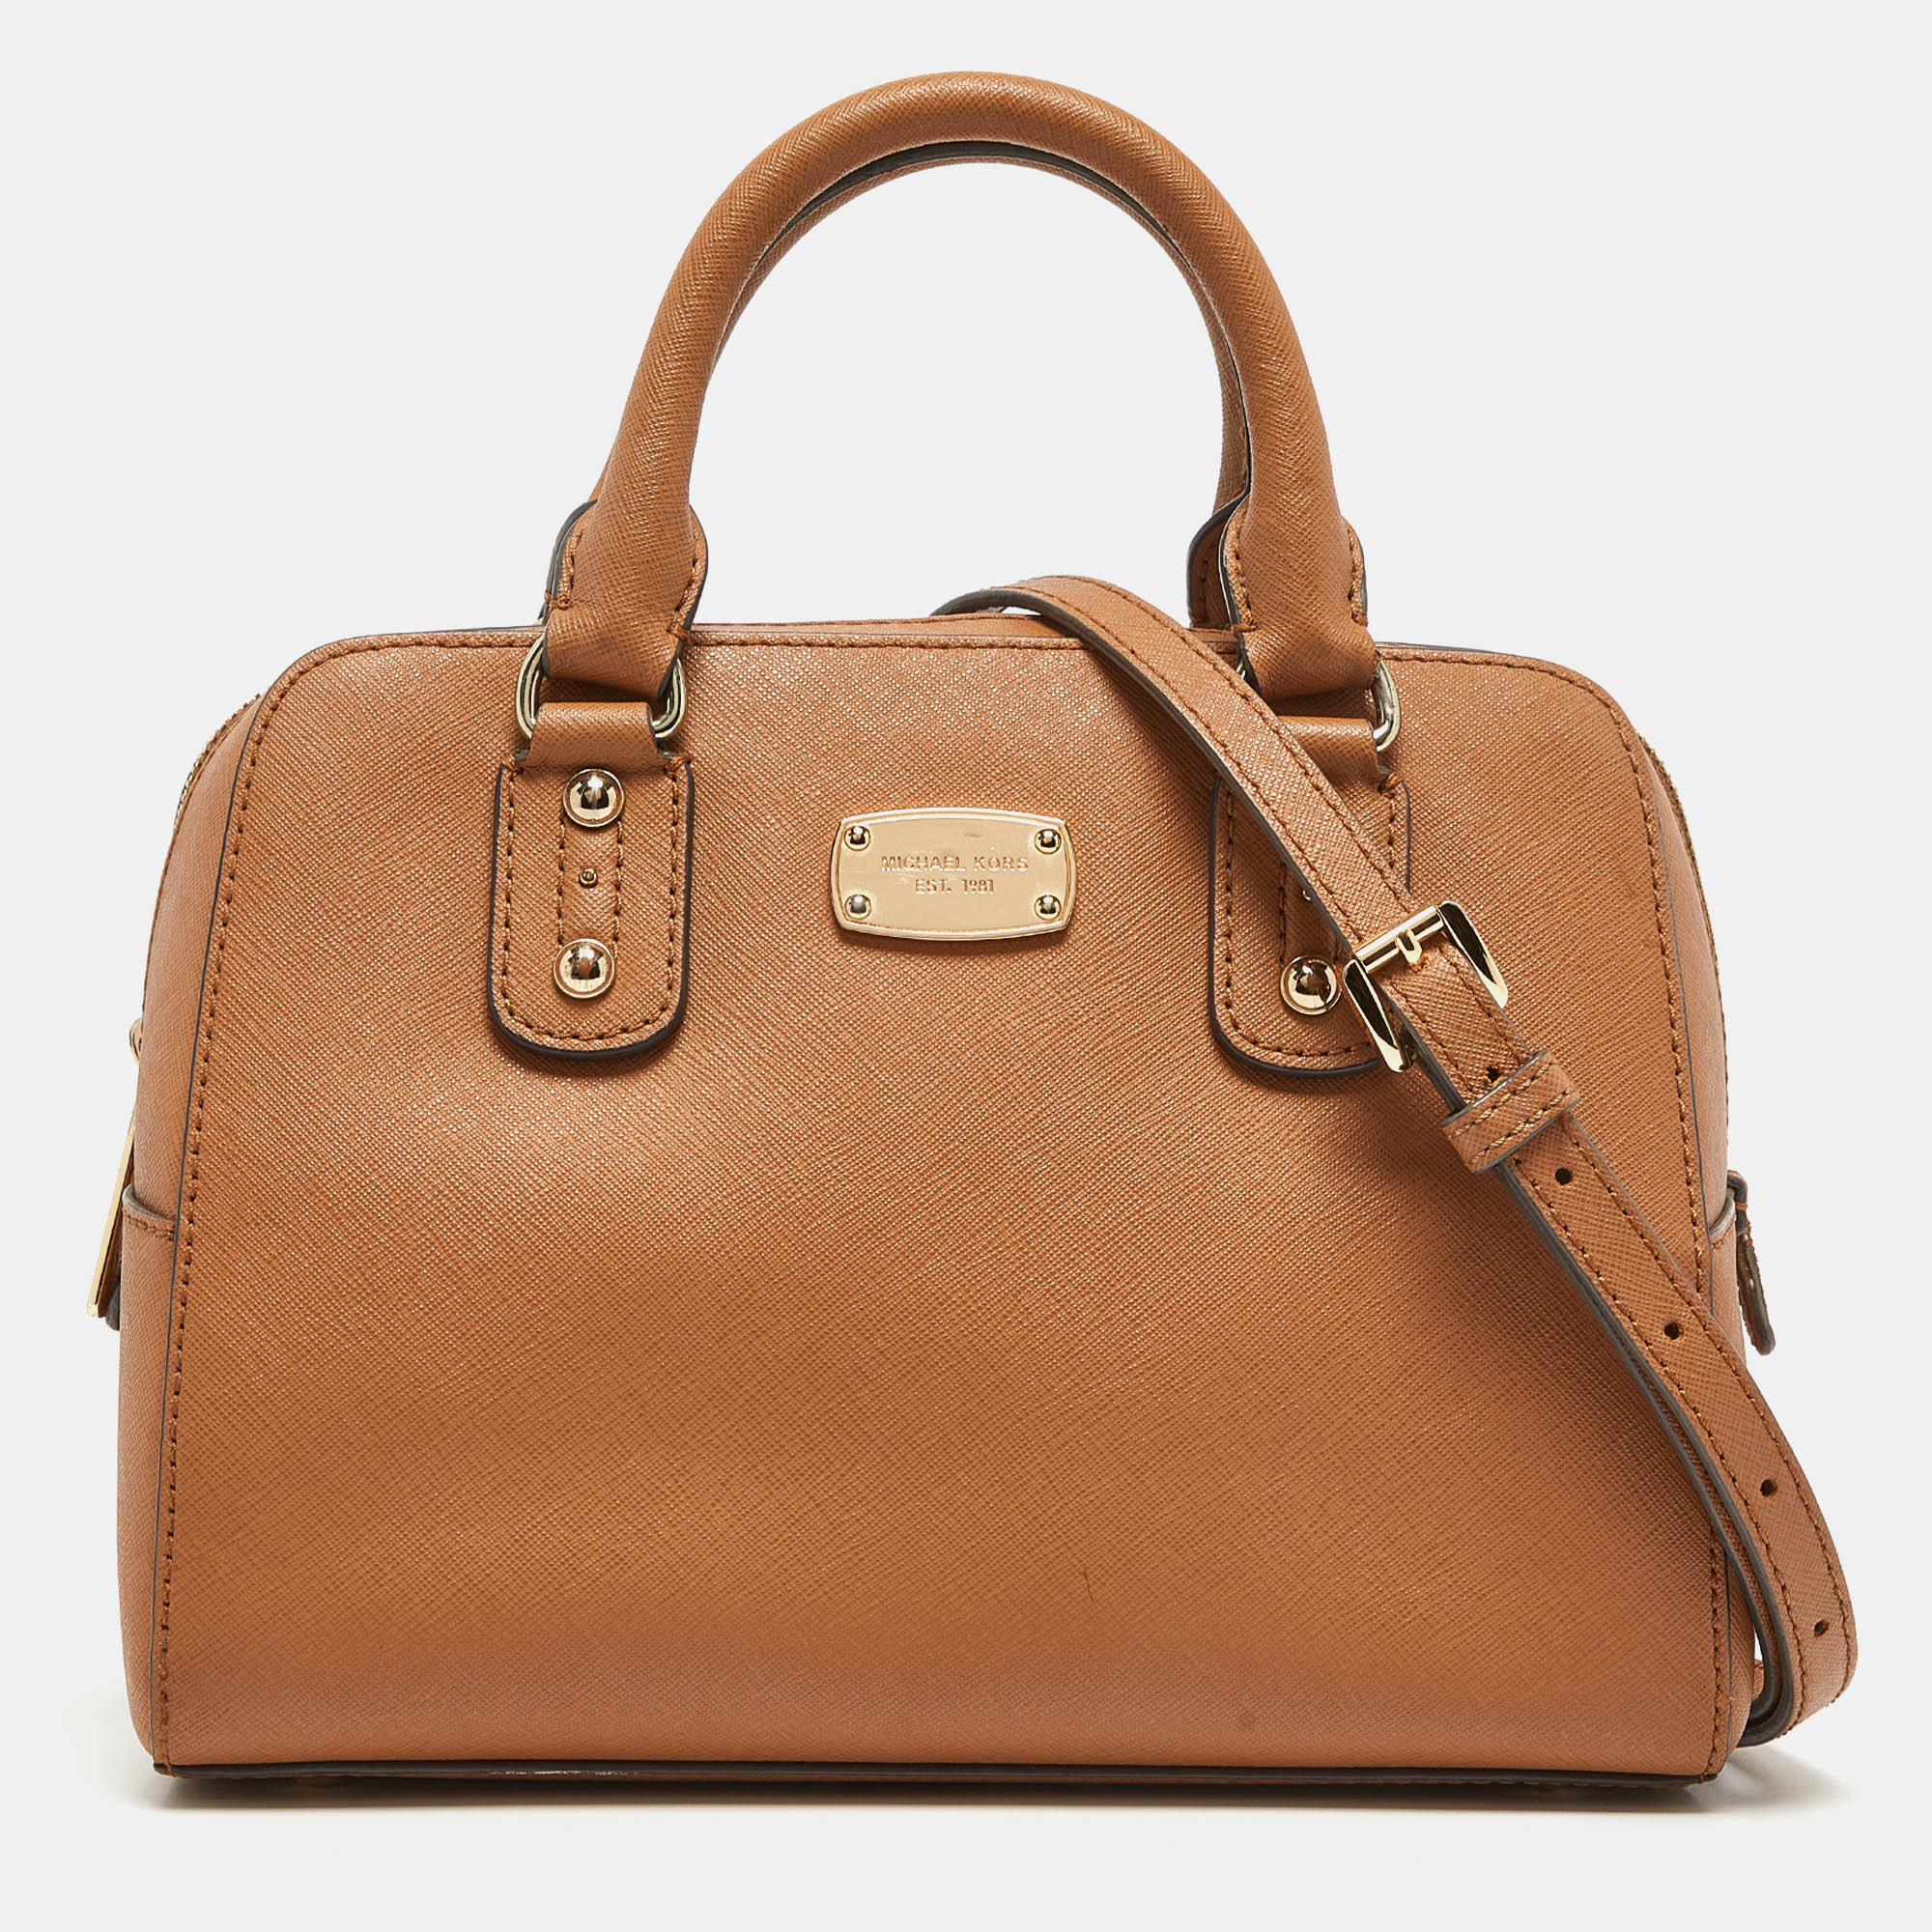 If you are looking for something that reflects chic and luxury then this satchel is a perfect choice. Crafted from premium materials it can be conveniently carried around and its interior is spaciously sized to house your belongings with ease.